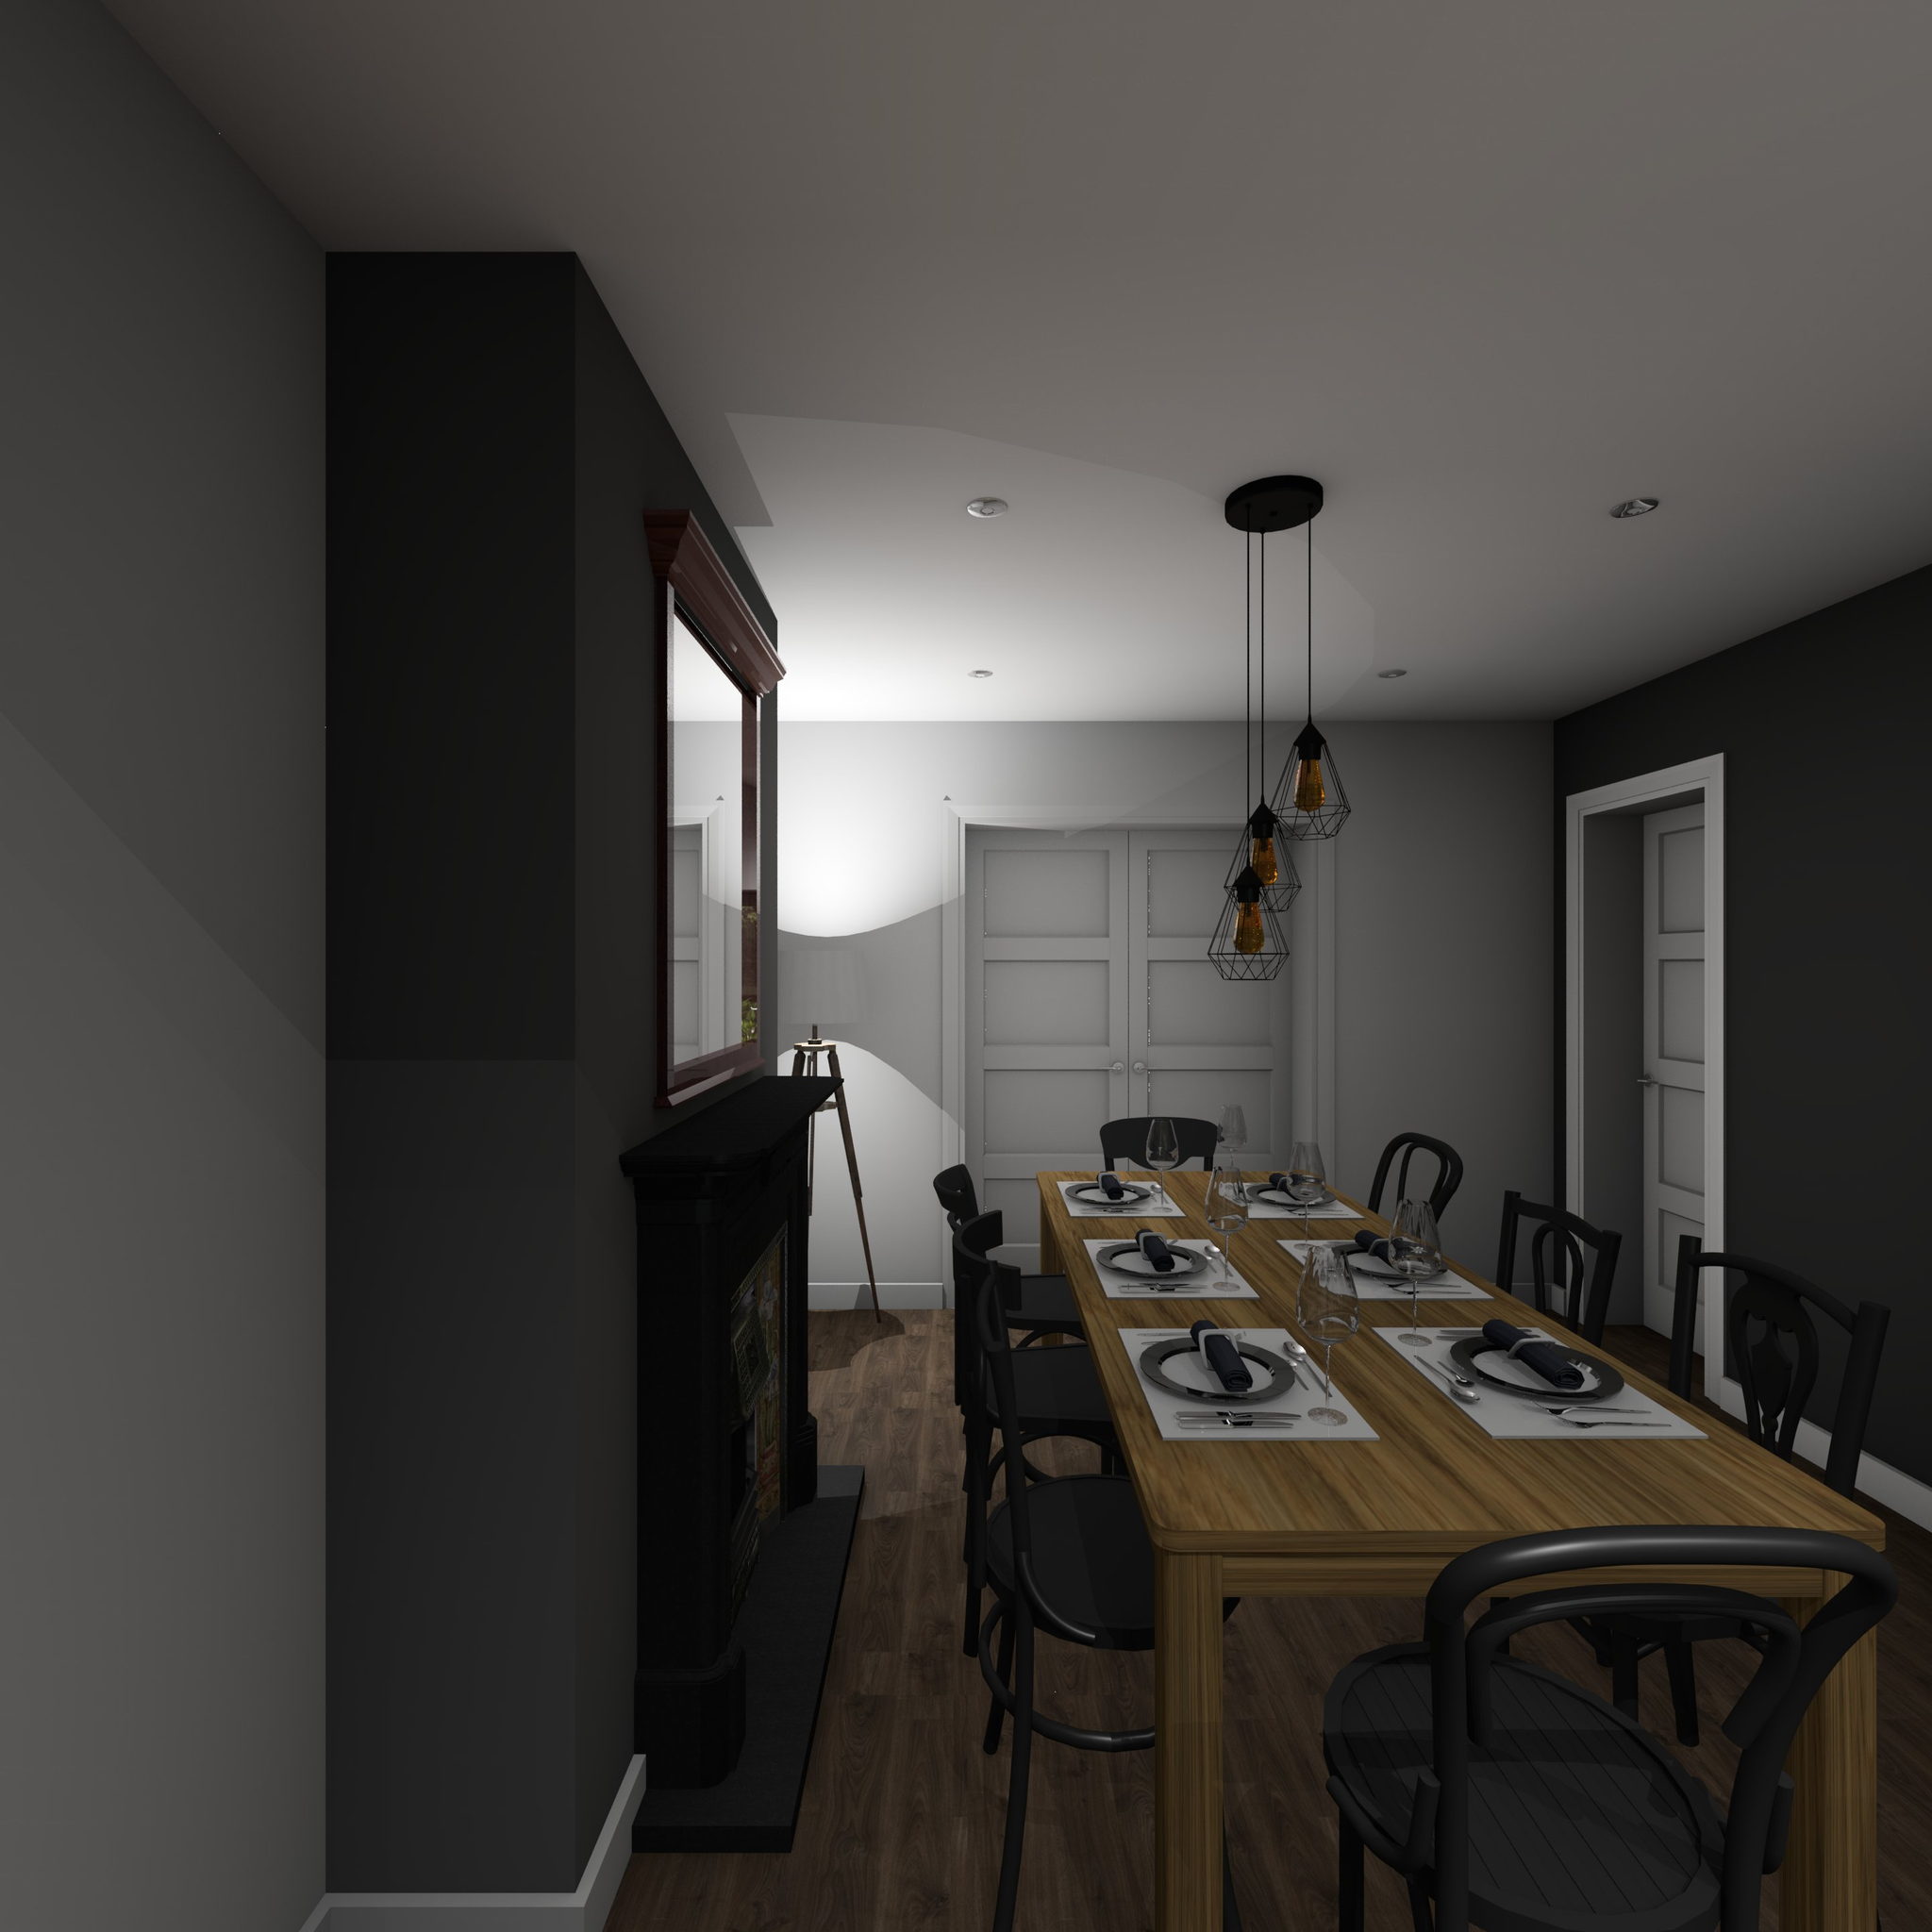 The Kitchen panorama created by David Fitton